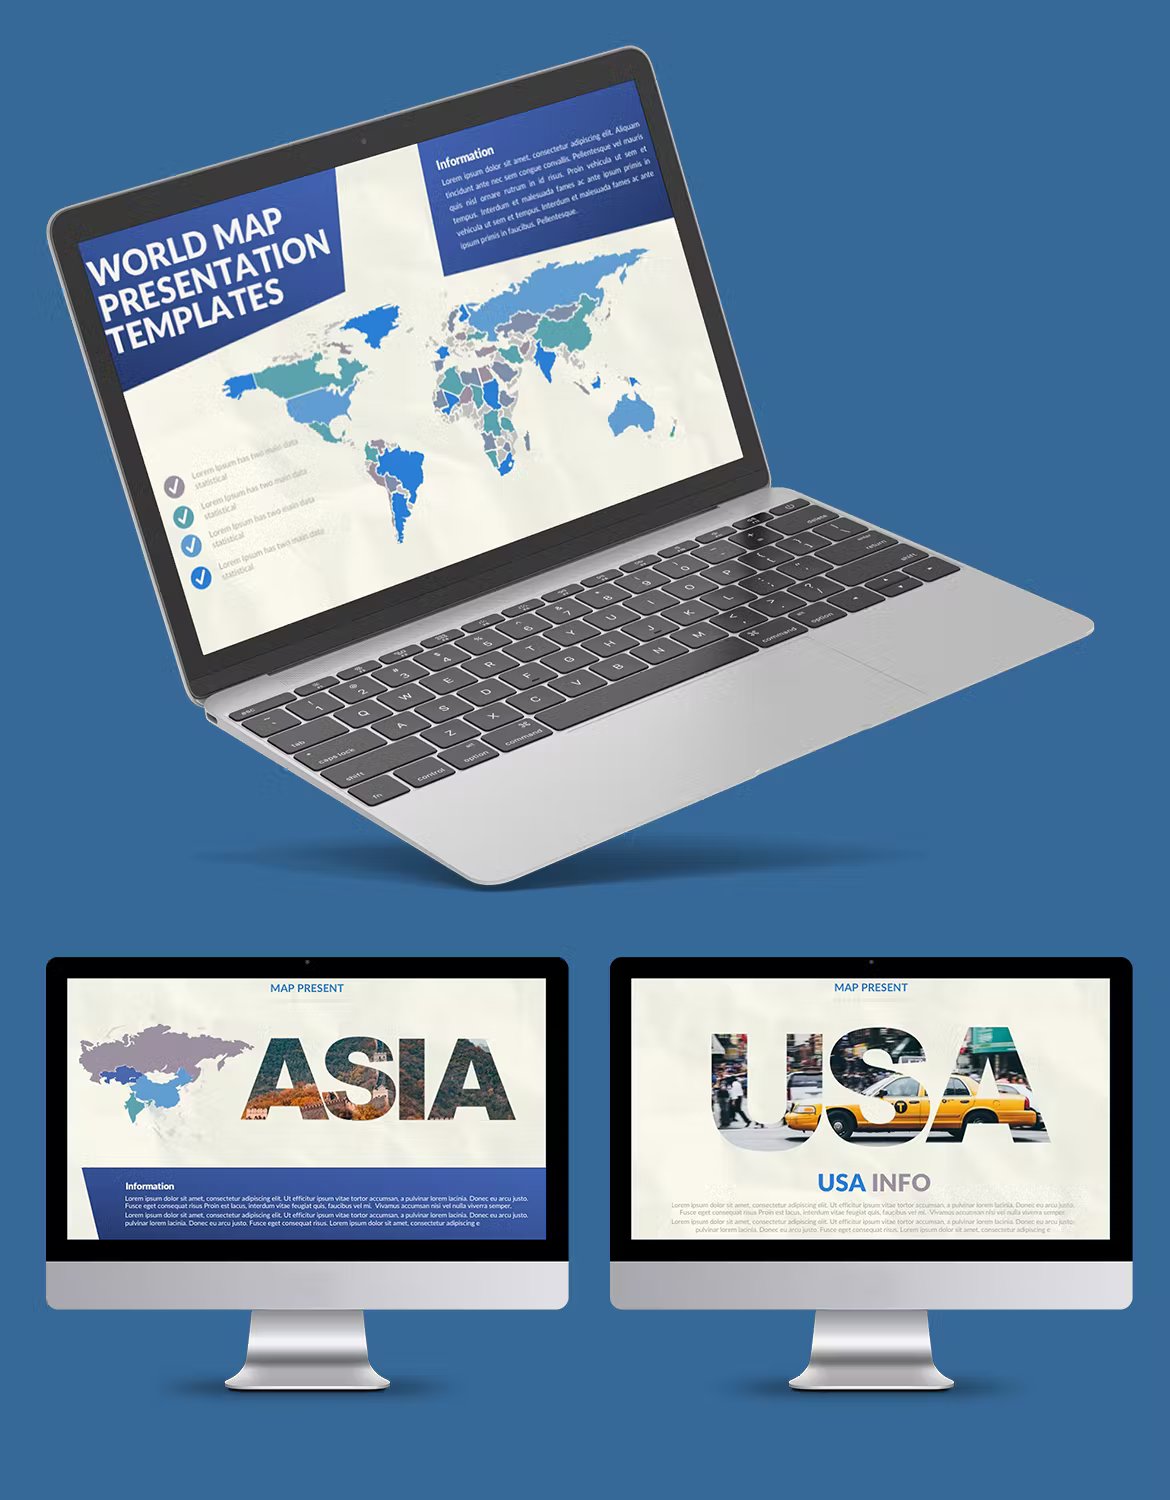 A mockup MacBook and 2 IMac mockups with different assign powerpoint templates on a blue background.